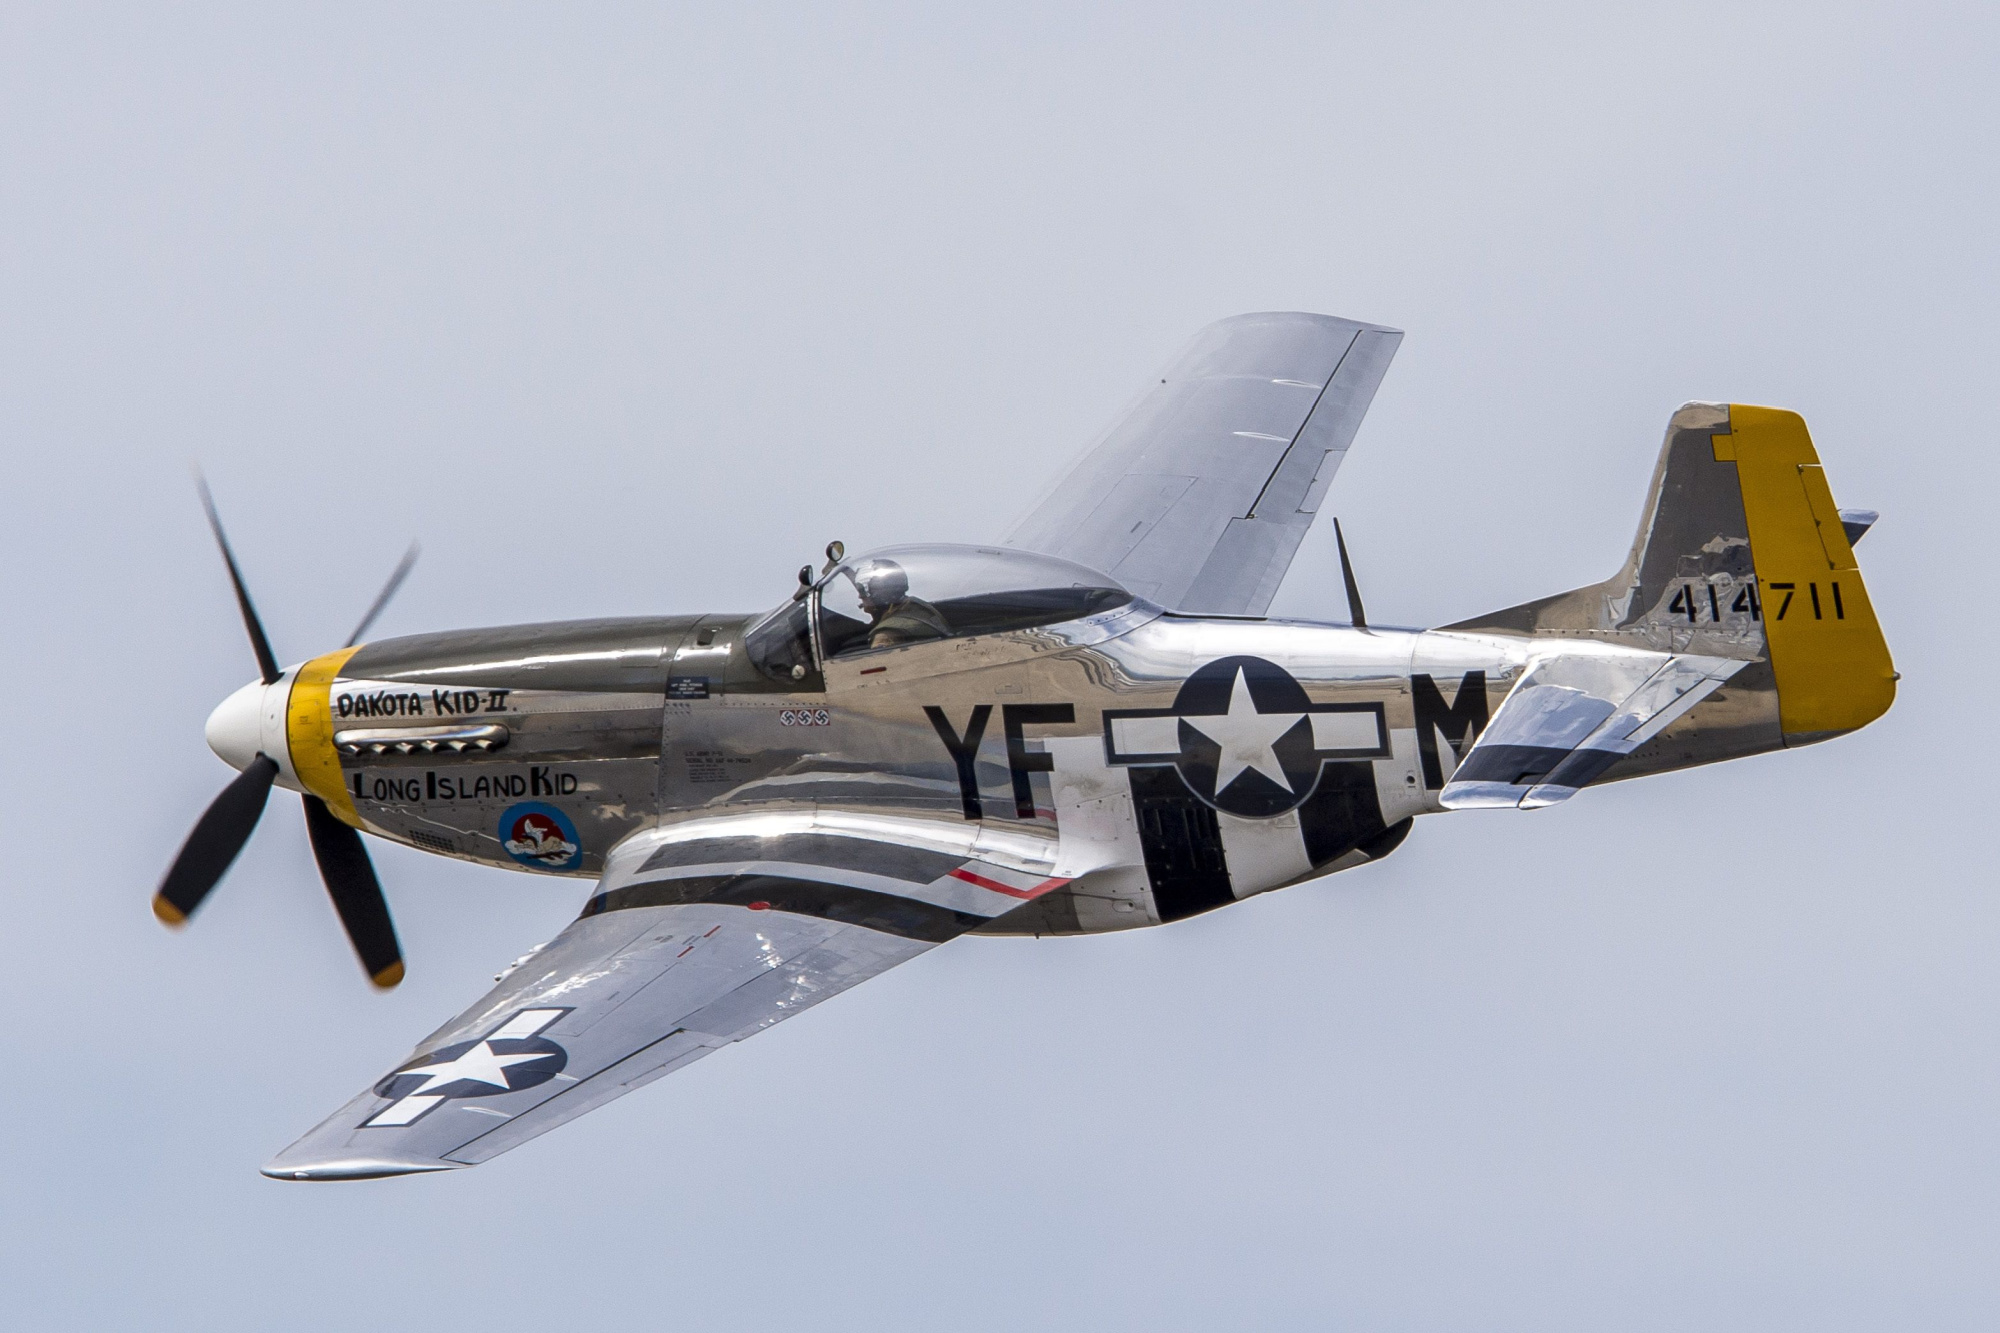 North American P-51 Mustang: fighter plane aviation history